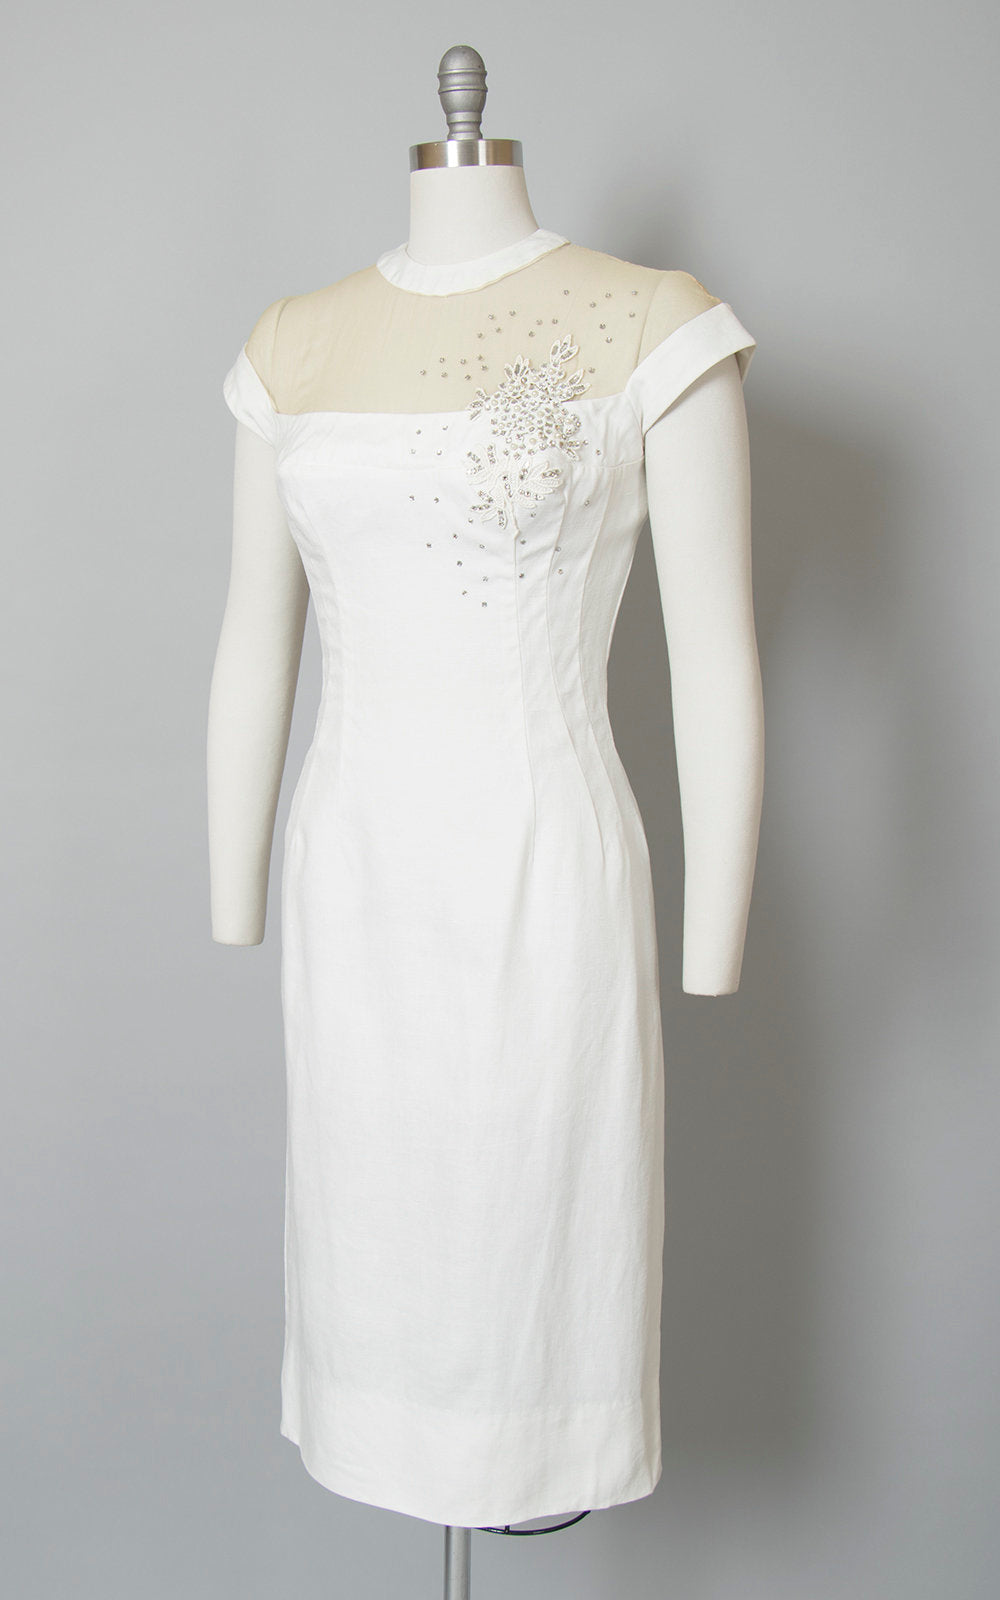 Vintage 1950s Dress | 50s White Linen Sheer Mesh Neckline Rhinestone Beaded Lace Wiggle Cocktail Party Bombshell Dress (small)